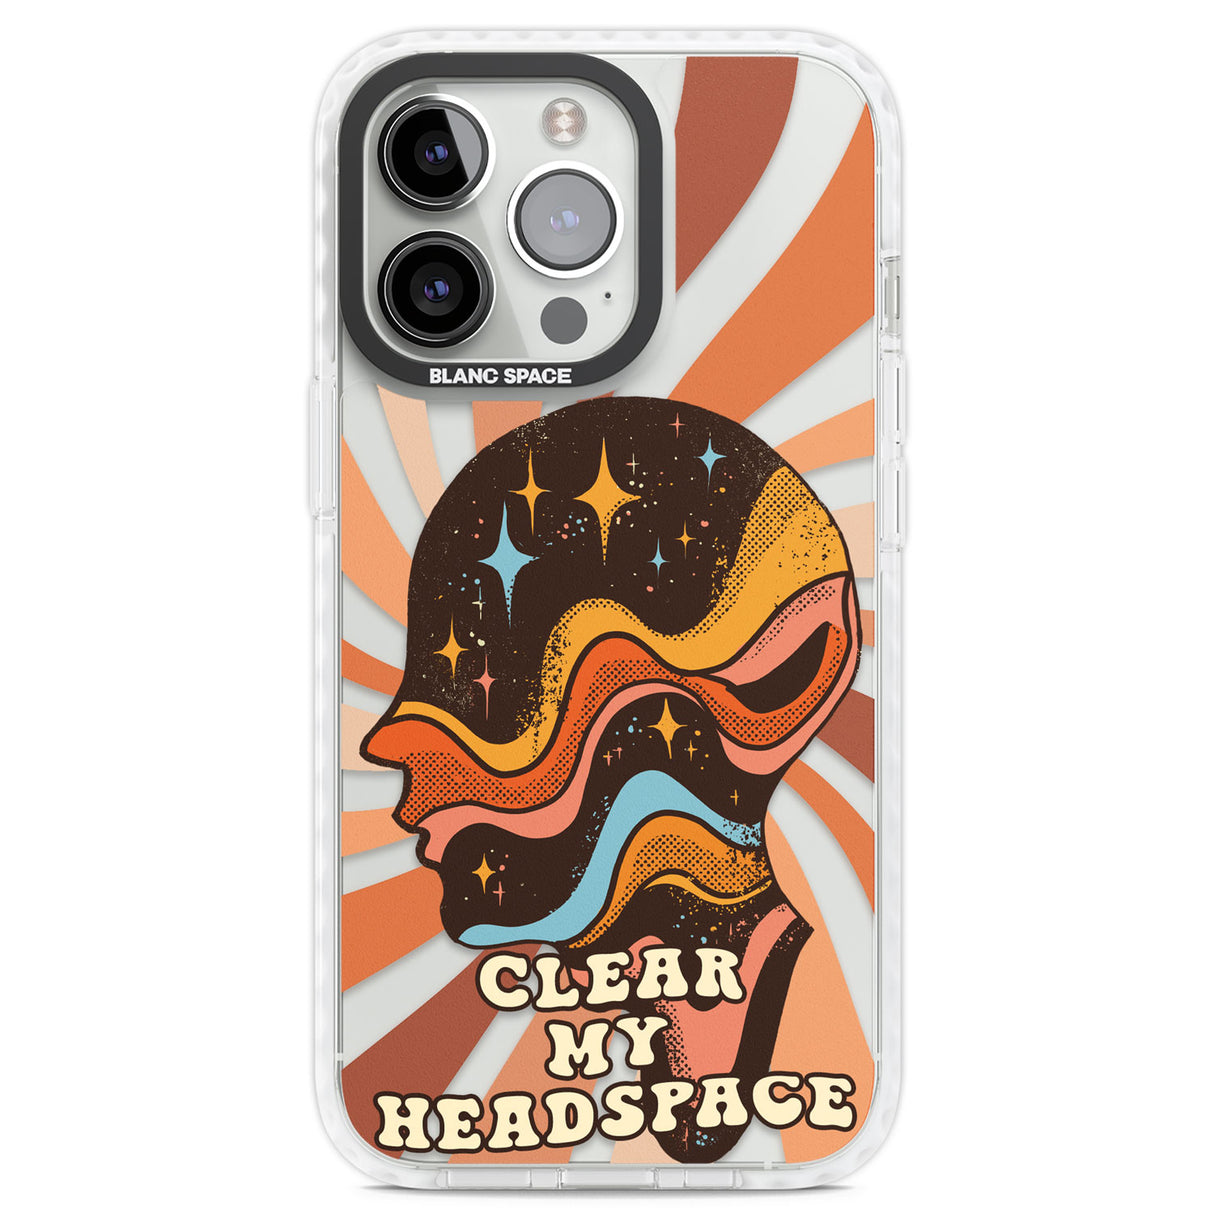 Clear My Headspace Clear Impact Phone Case for iPhone 13 Pro, iPhone 14 Pro, iPhone 15 Pro